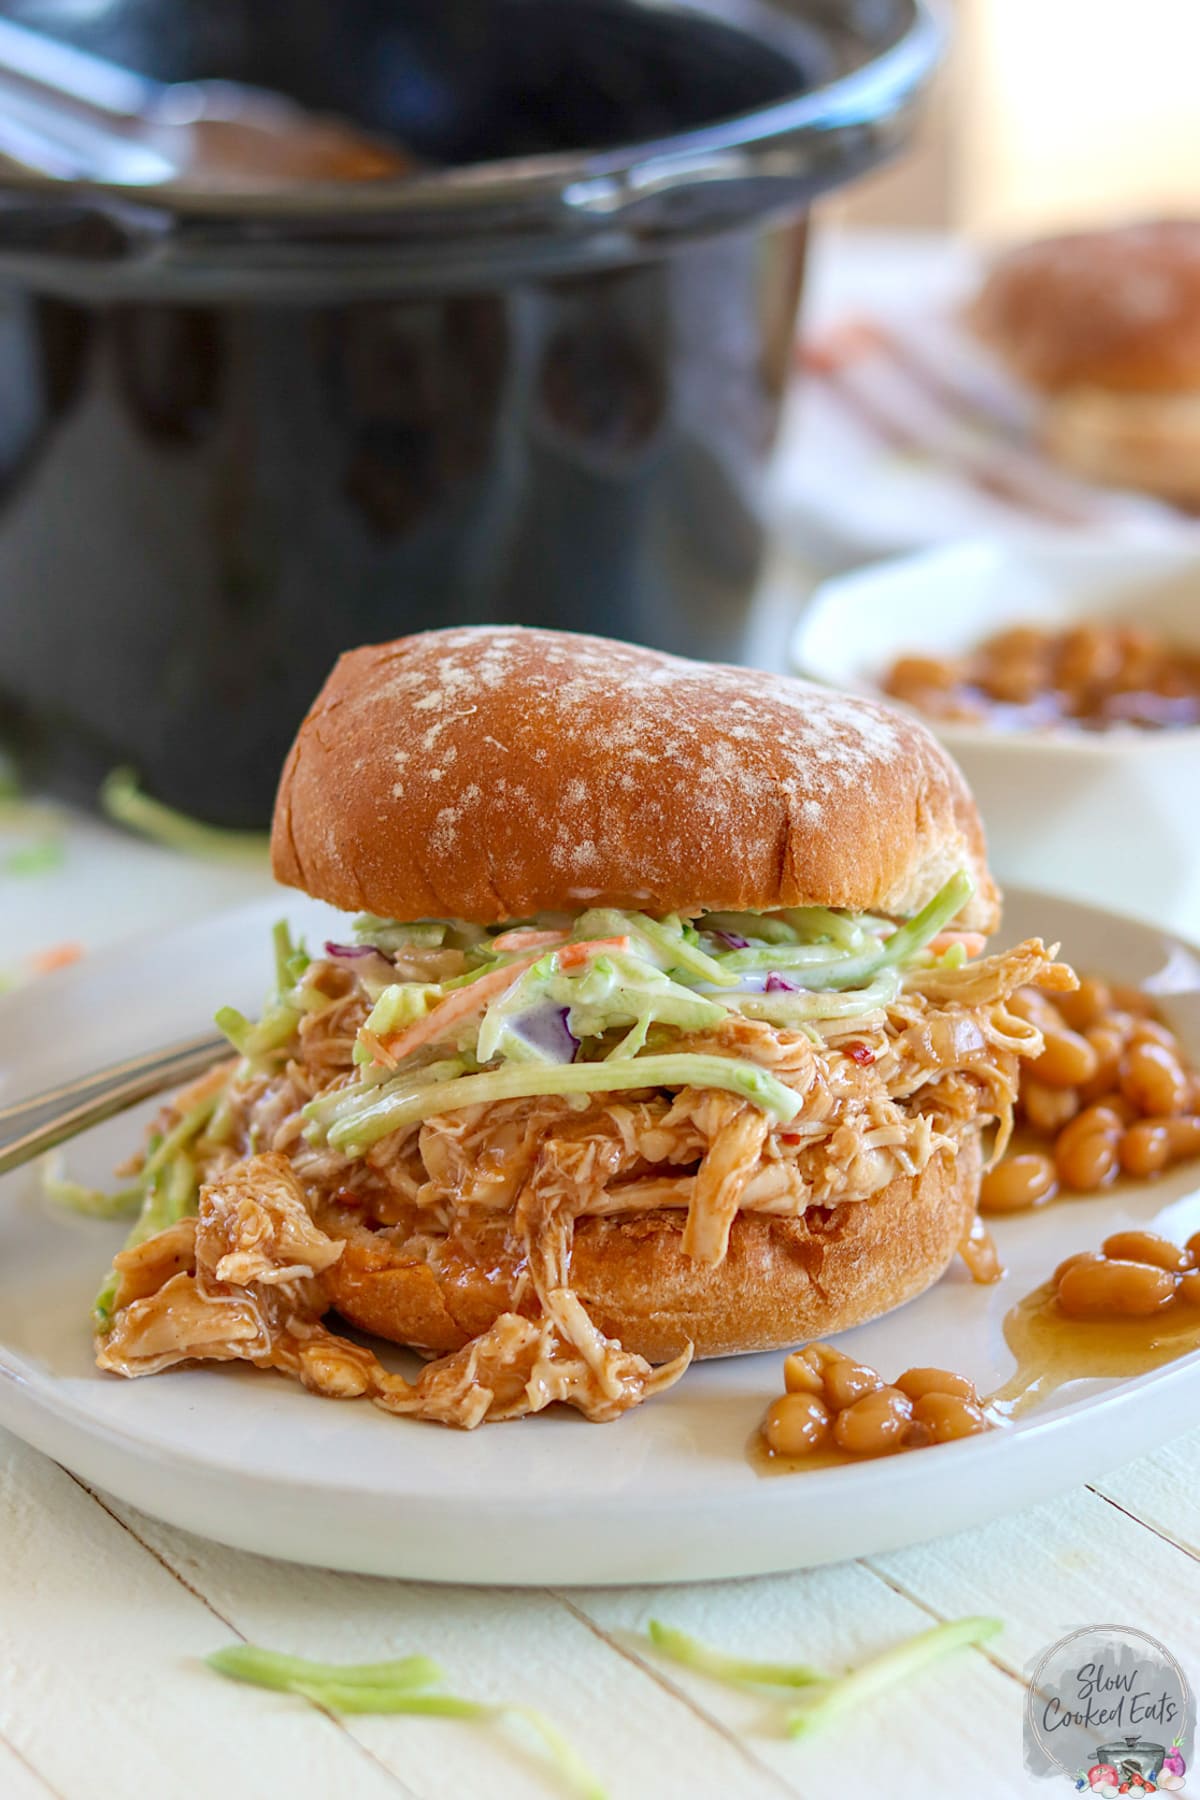 Crock pot pulled chicken on a hamburger bun with coleslaw.